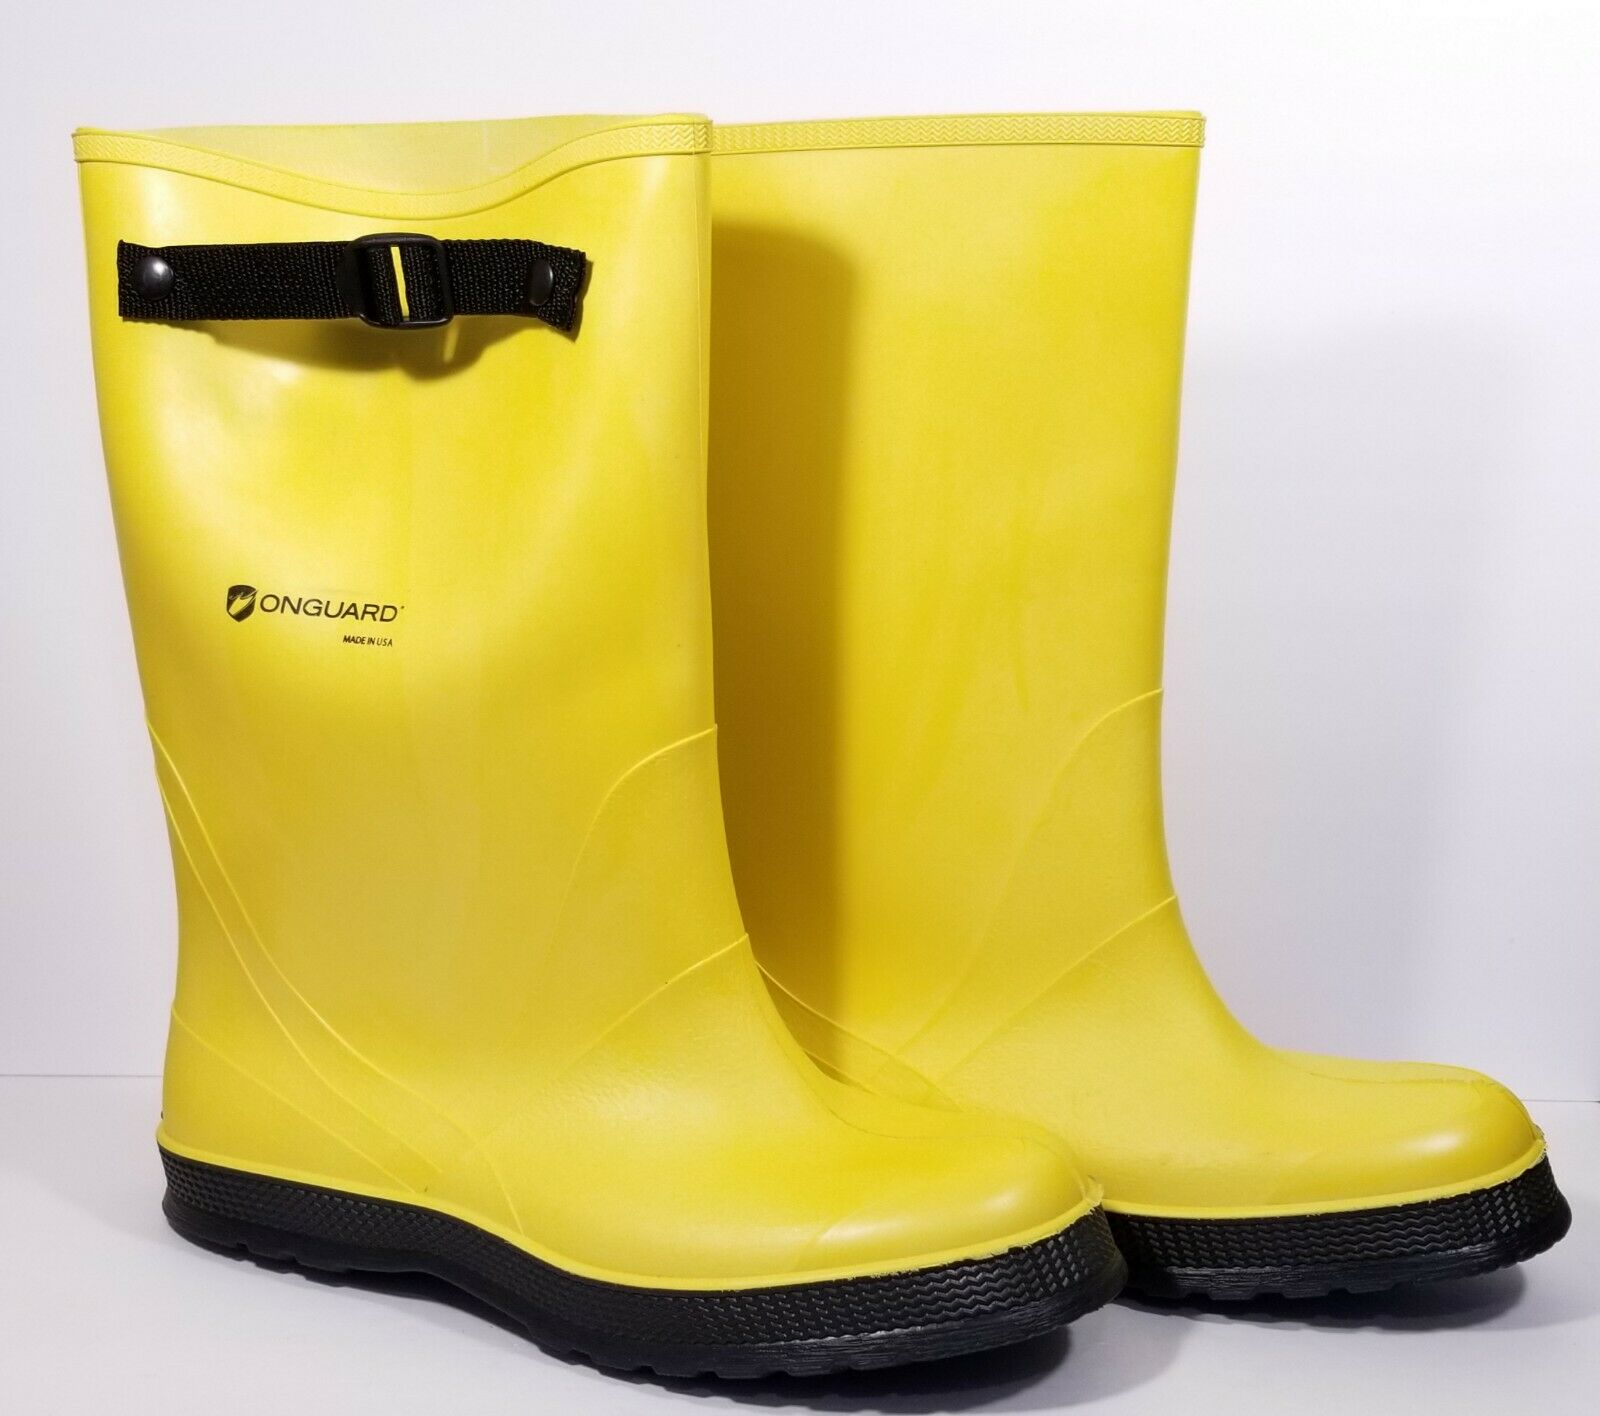 Departments - ONGUARD YELLOW 17